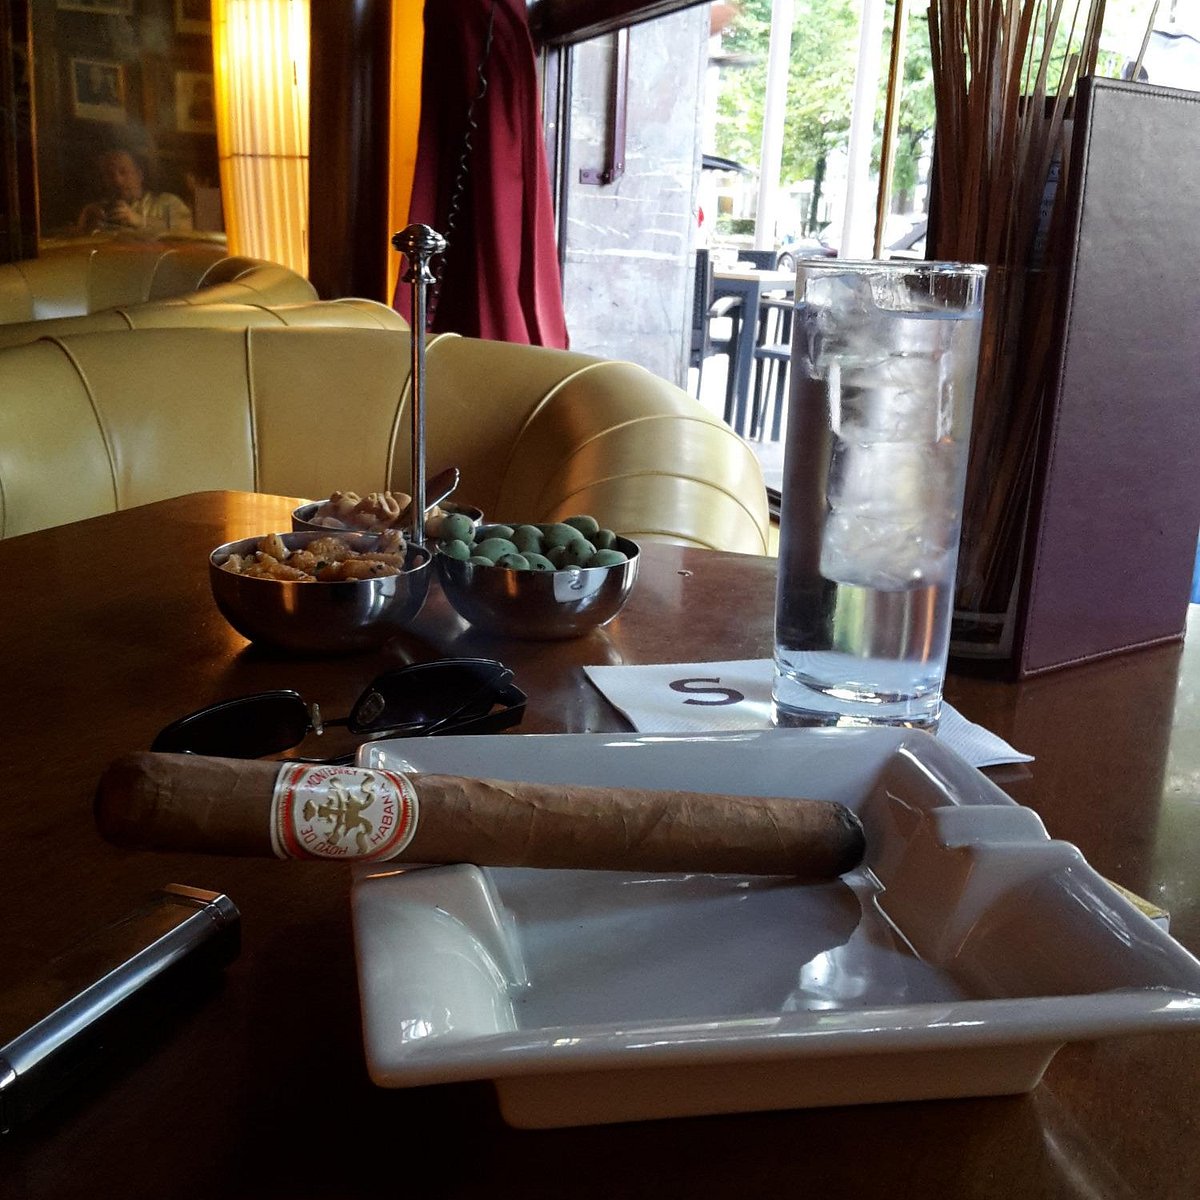 Where to buy Cuban cigars in Berlin?